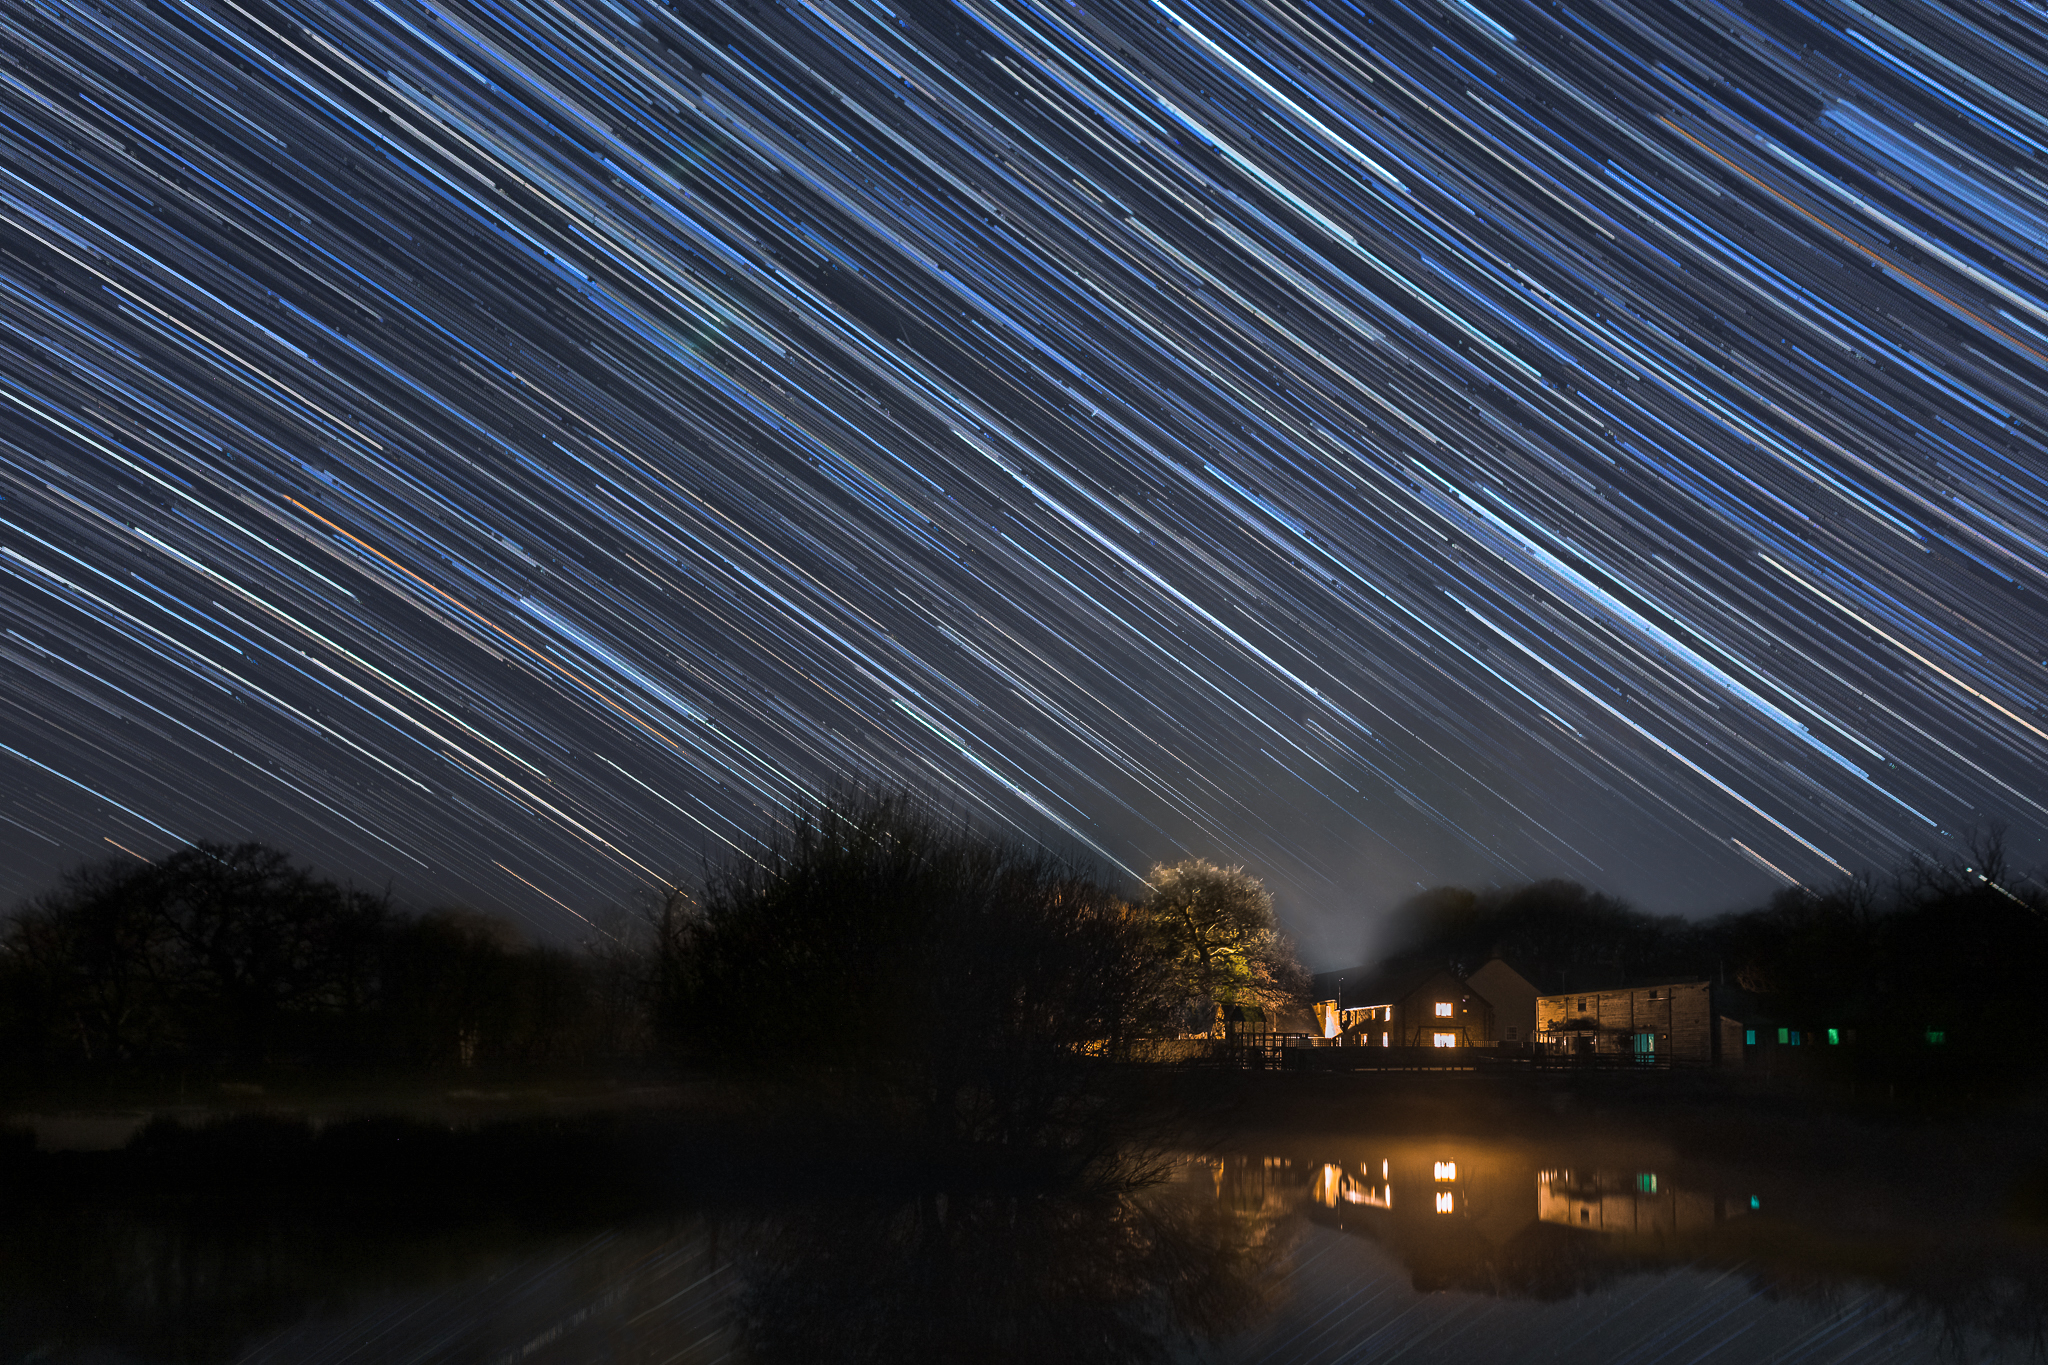 Intro to Astrophotography - Star Trails